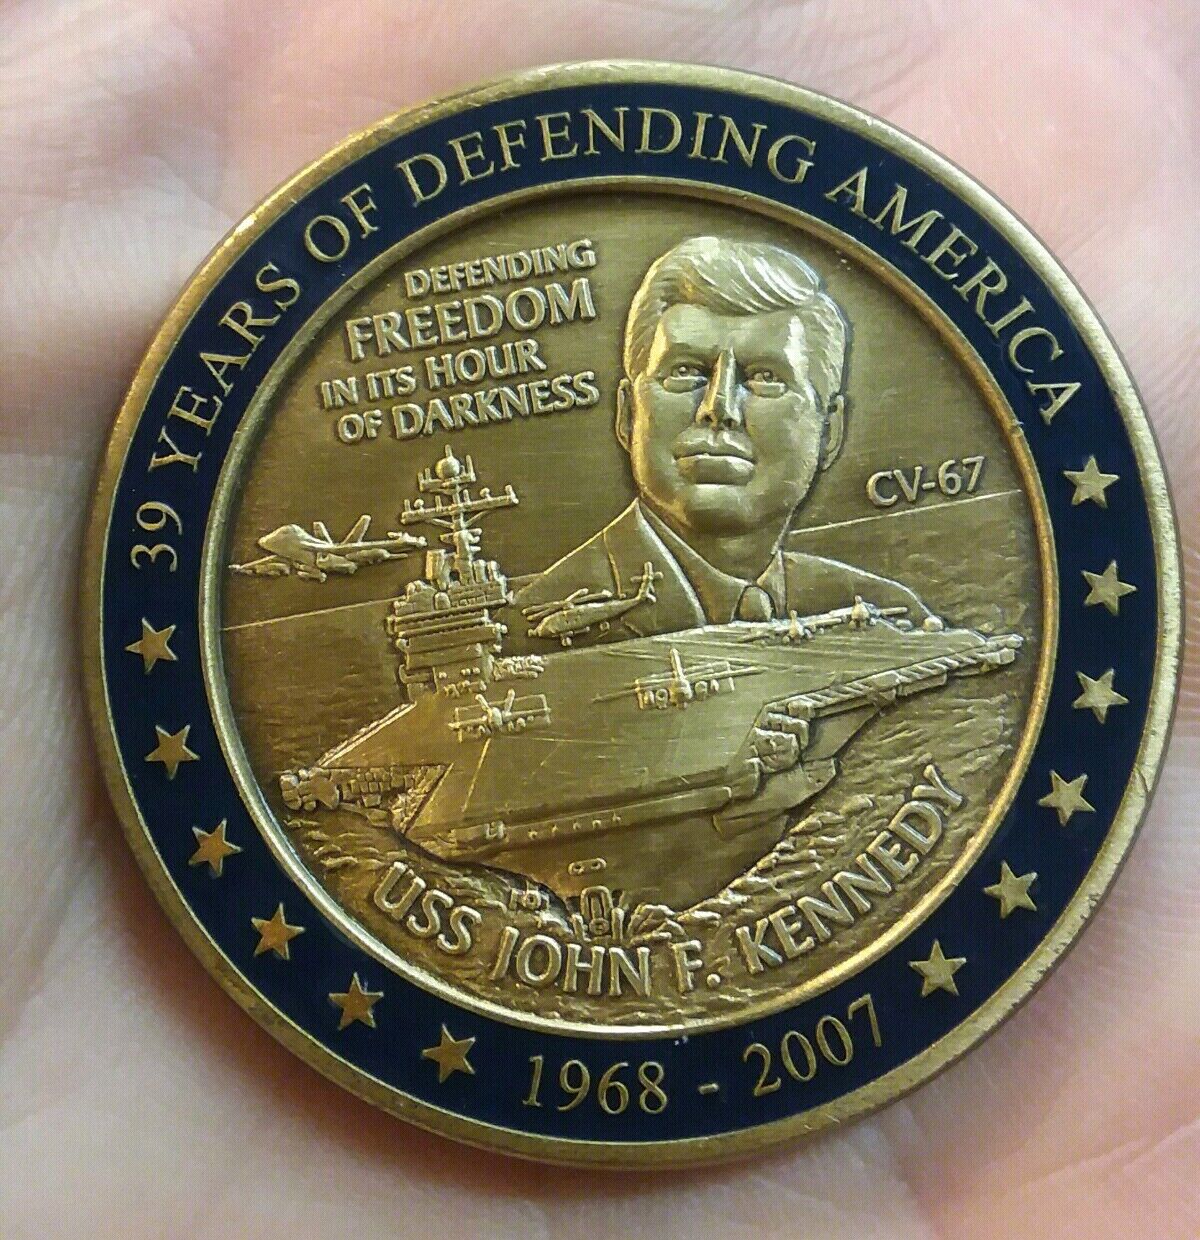 USS John F Kennedy CV-67 Challenge Free shipping on posting reviews low-pricing NAVY 1967-2007 Coin JFK